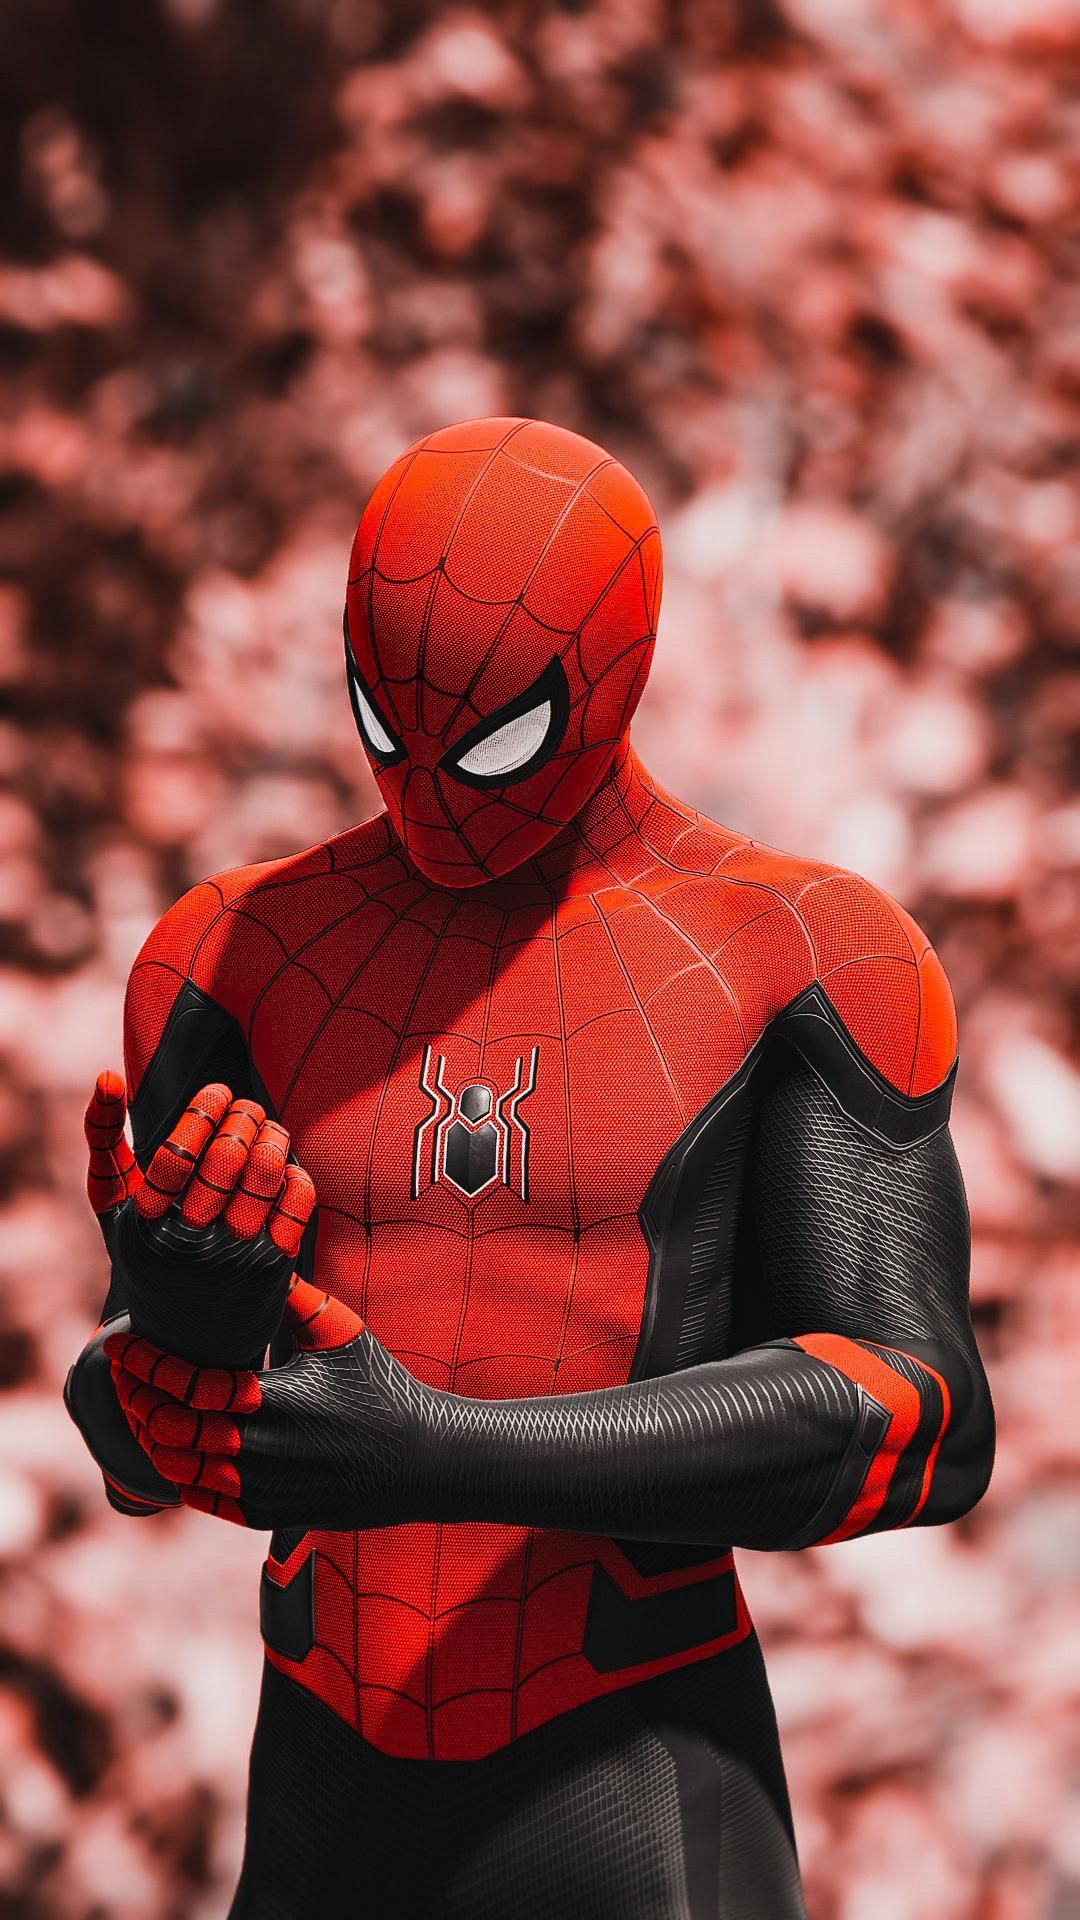 Spiderman Far From Home suit. Marvel spiderman art, Spiderman picture, Marvel spiderman